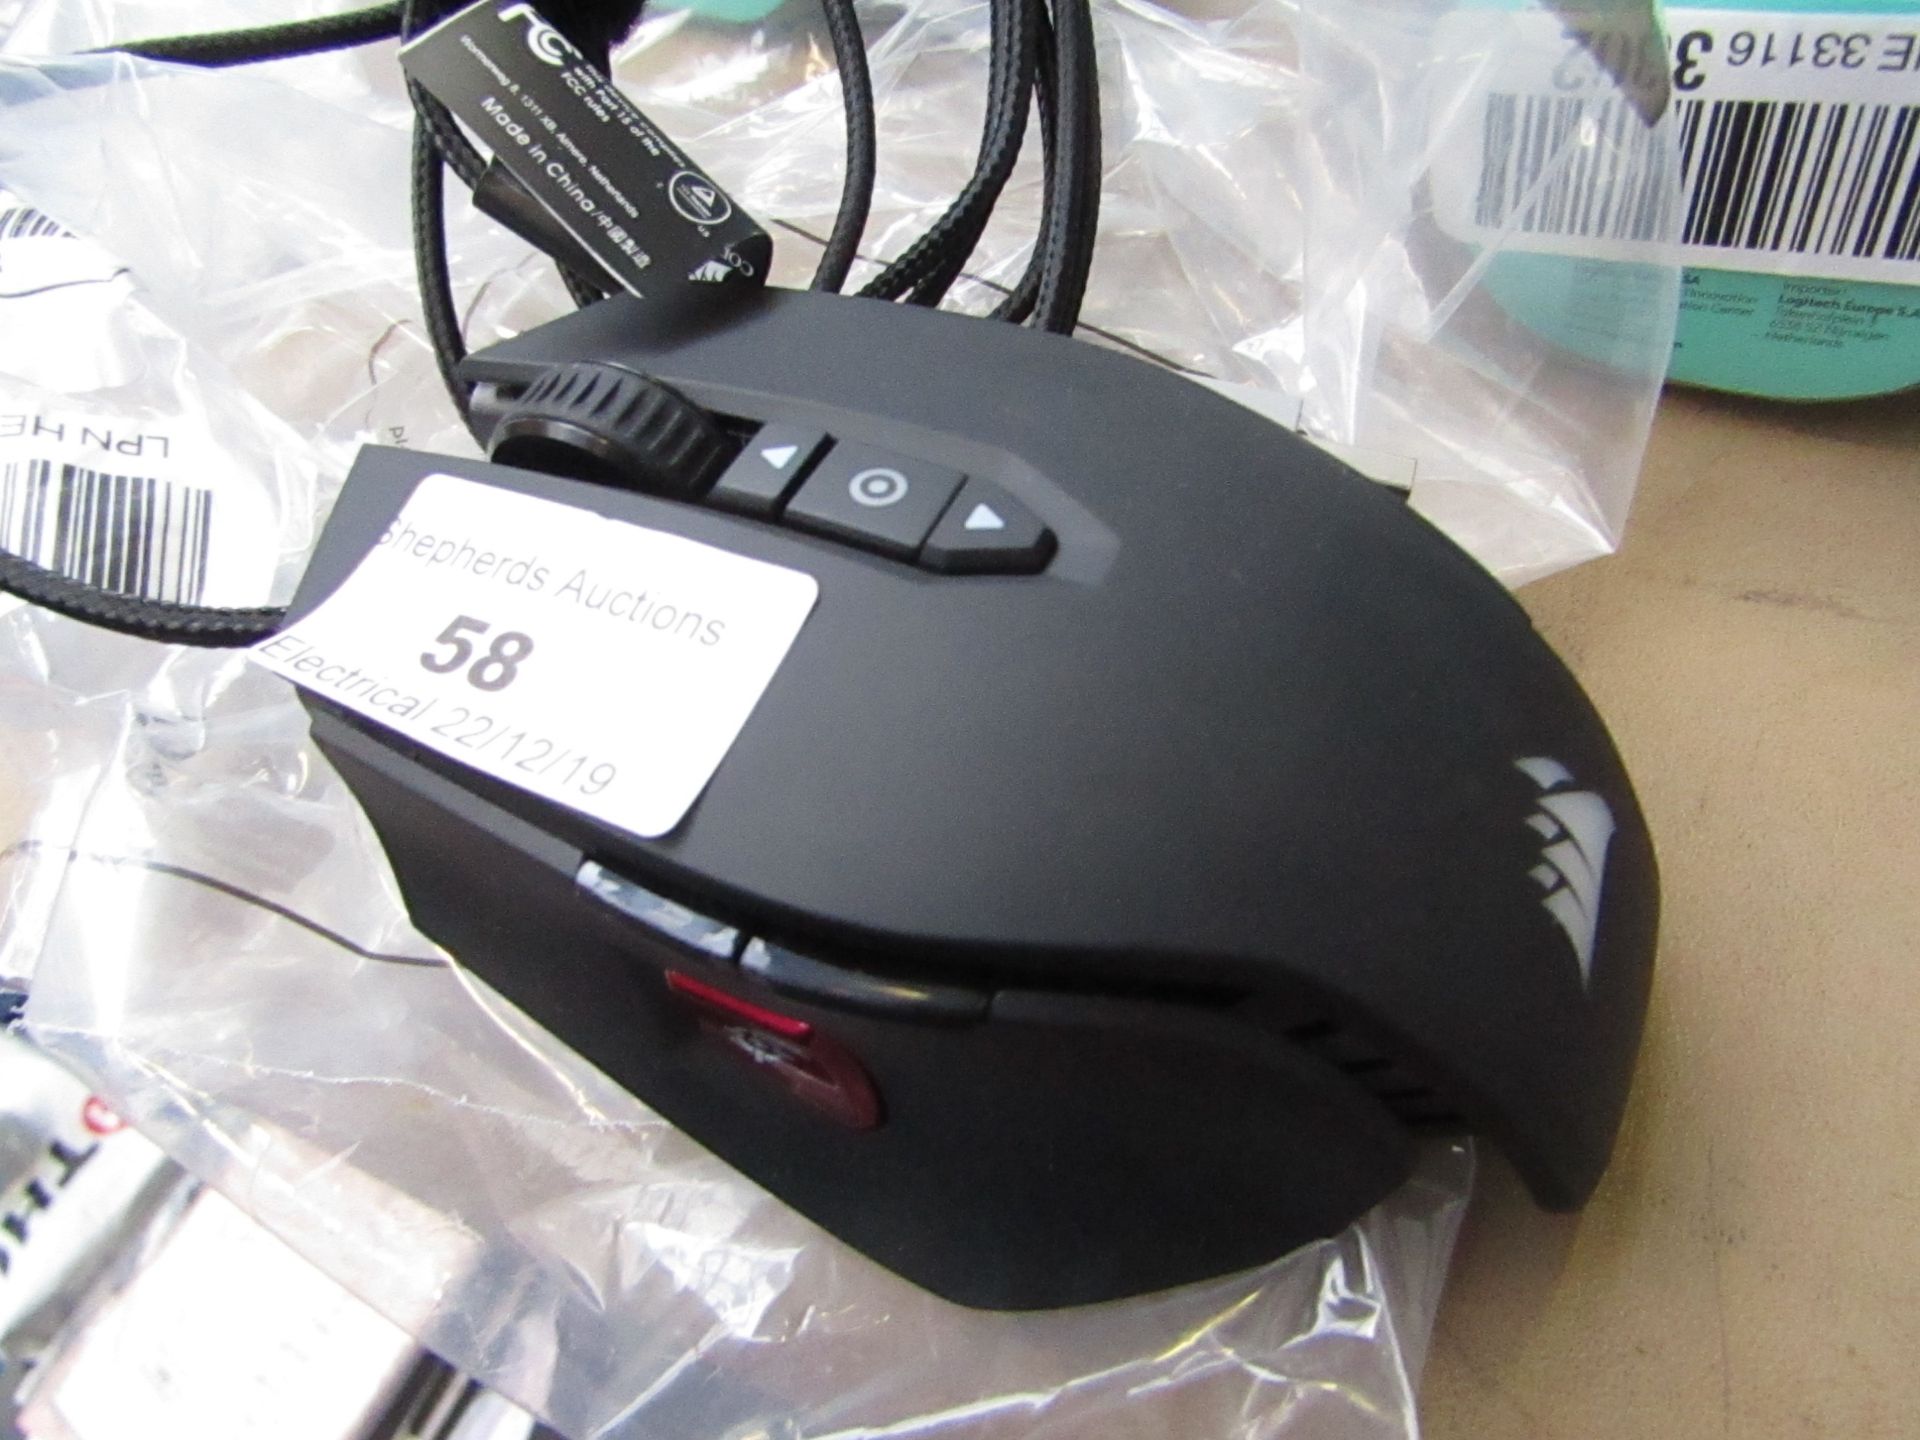 CORSAIR Gaming M65 PRO RGB FPS - Optical Mouse - Black - Untested and packaged. RRP Circa £40:00.